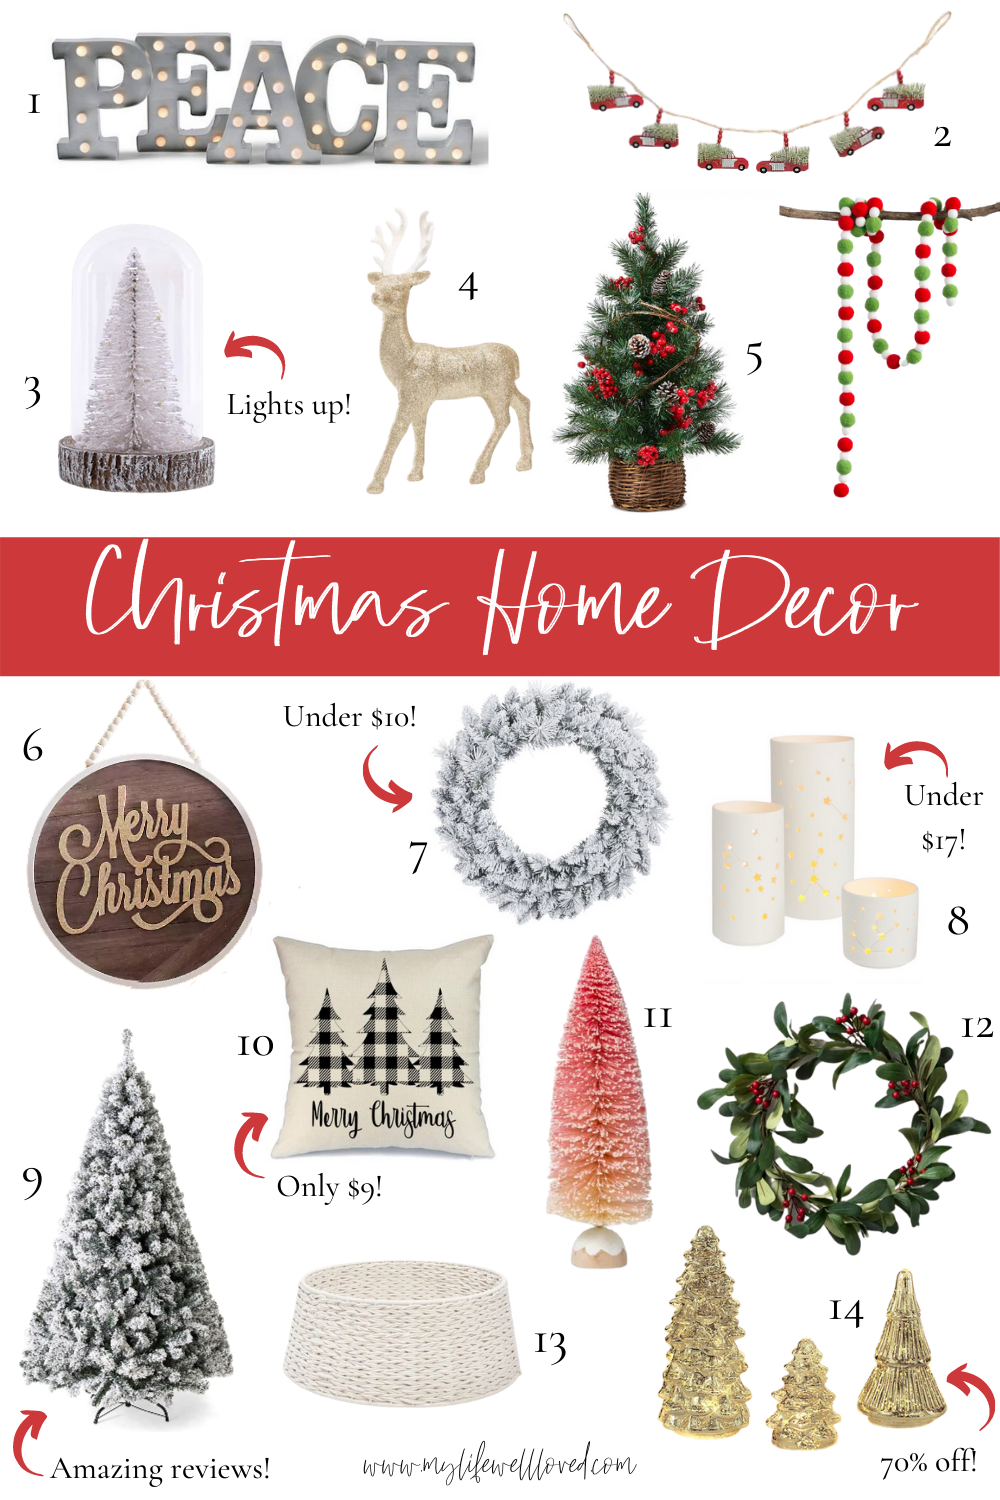 Top 10 christmas decorations on amazon that will make your holiday season merrier